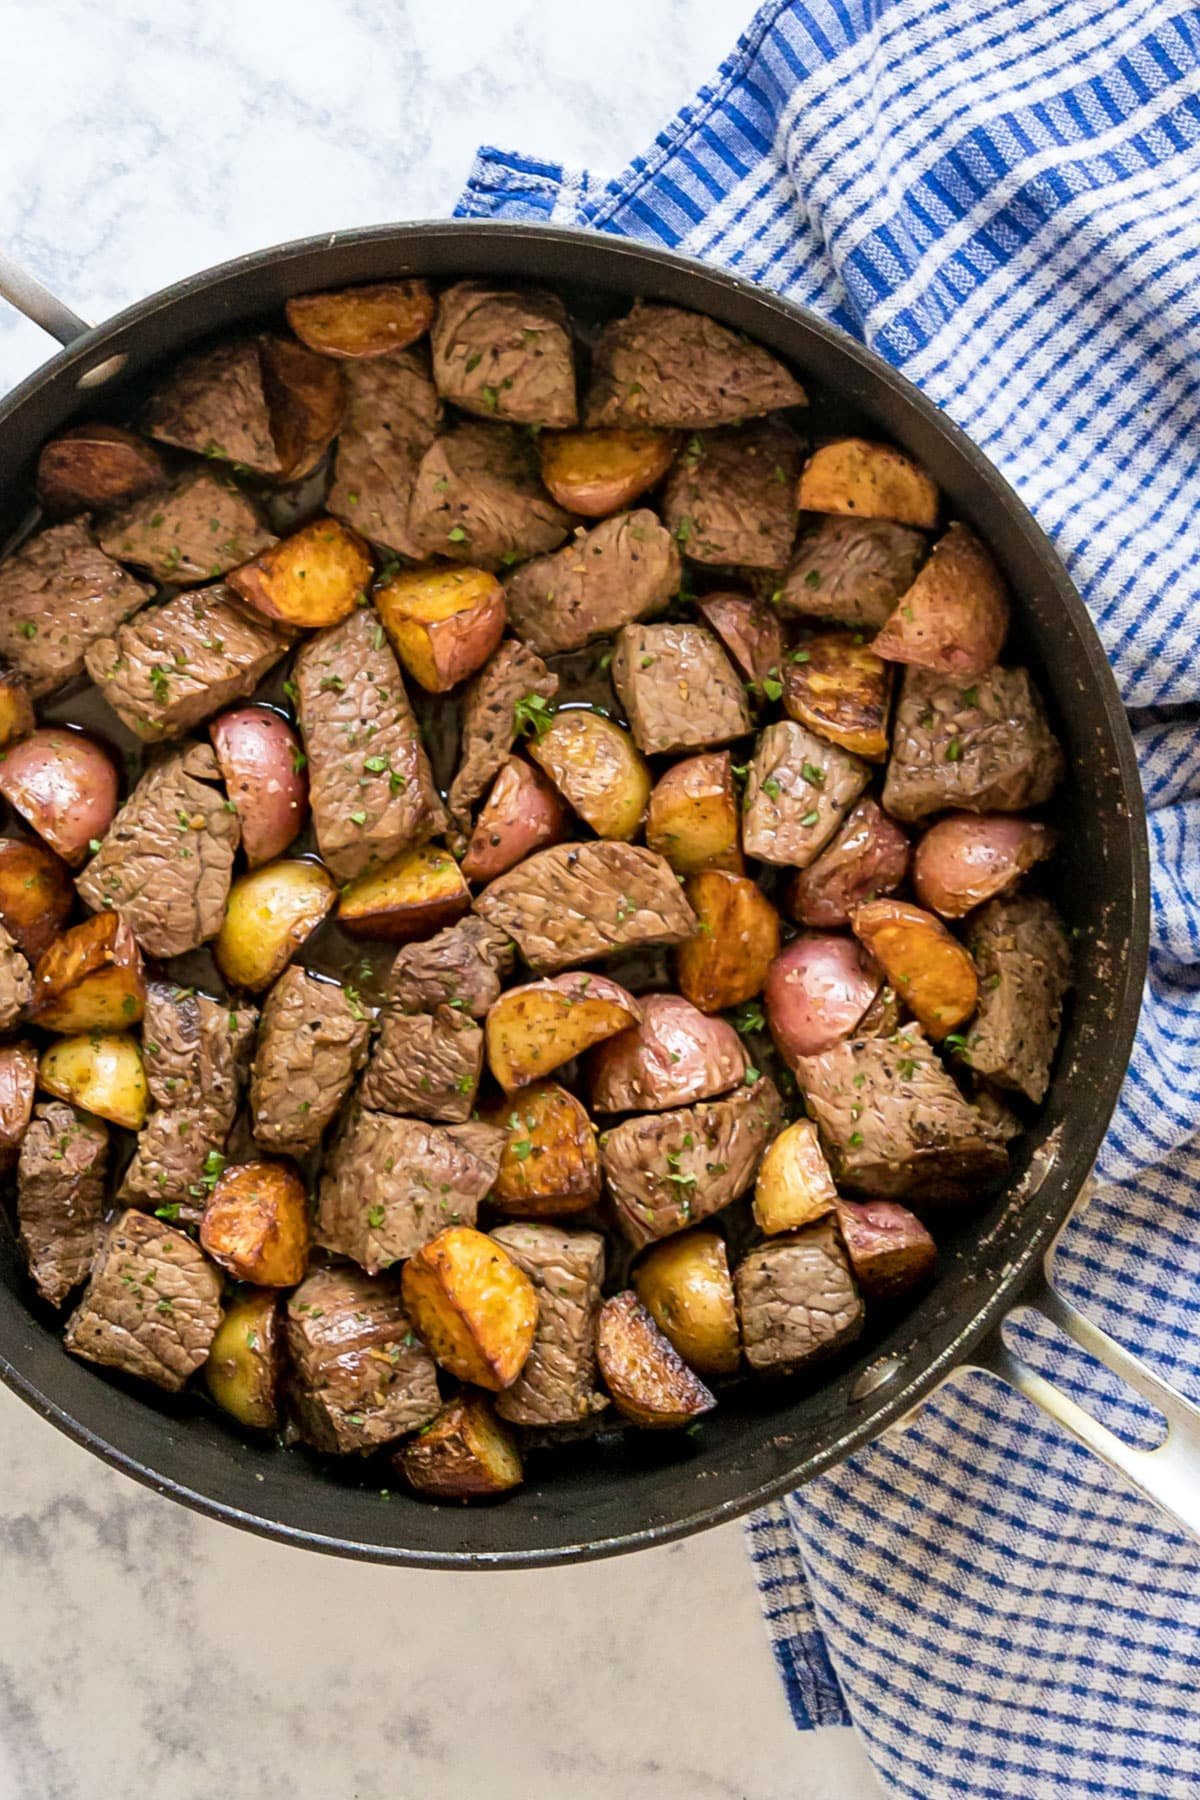 An overhead image of a skillet of steak and potato bites with a blue towel next to it.